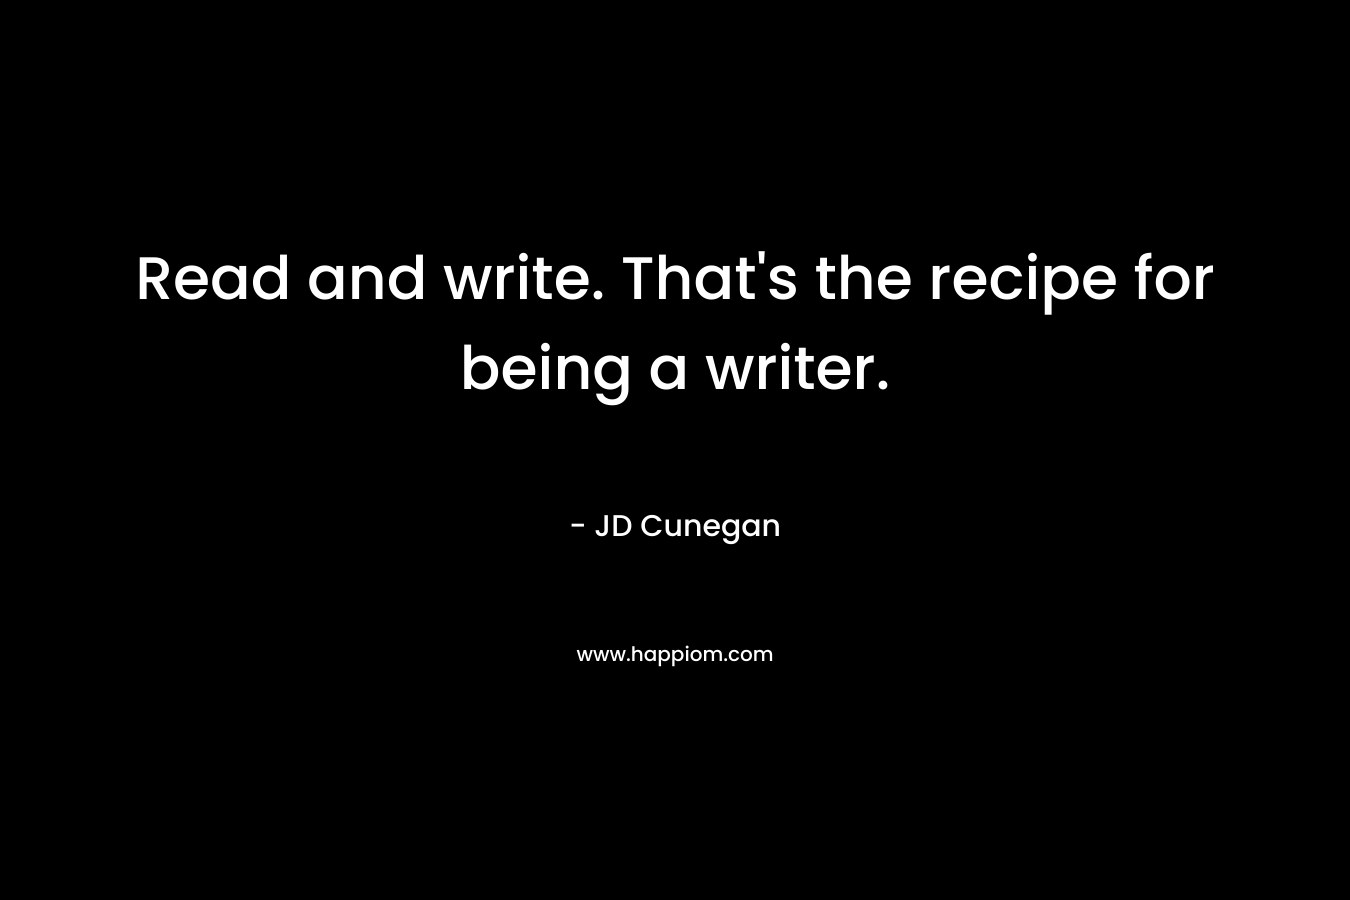 Read and write. That's the recipe for being a writer.